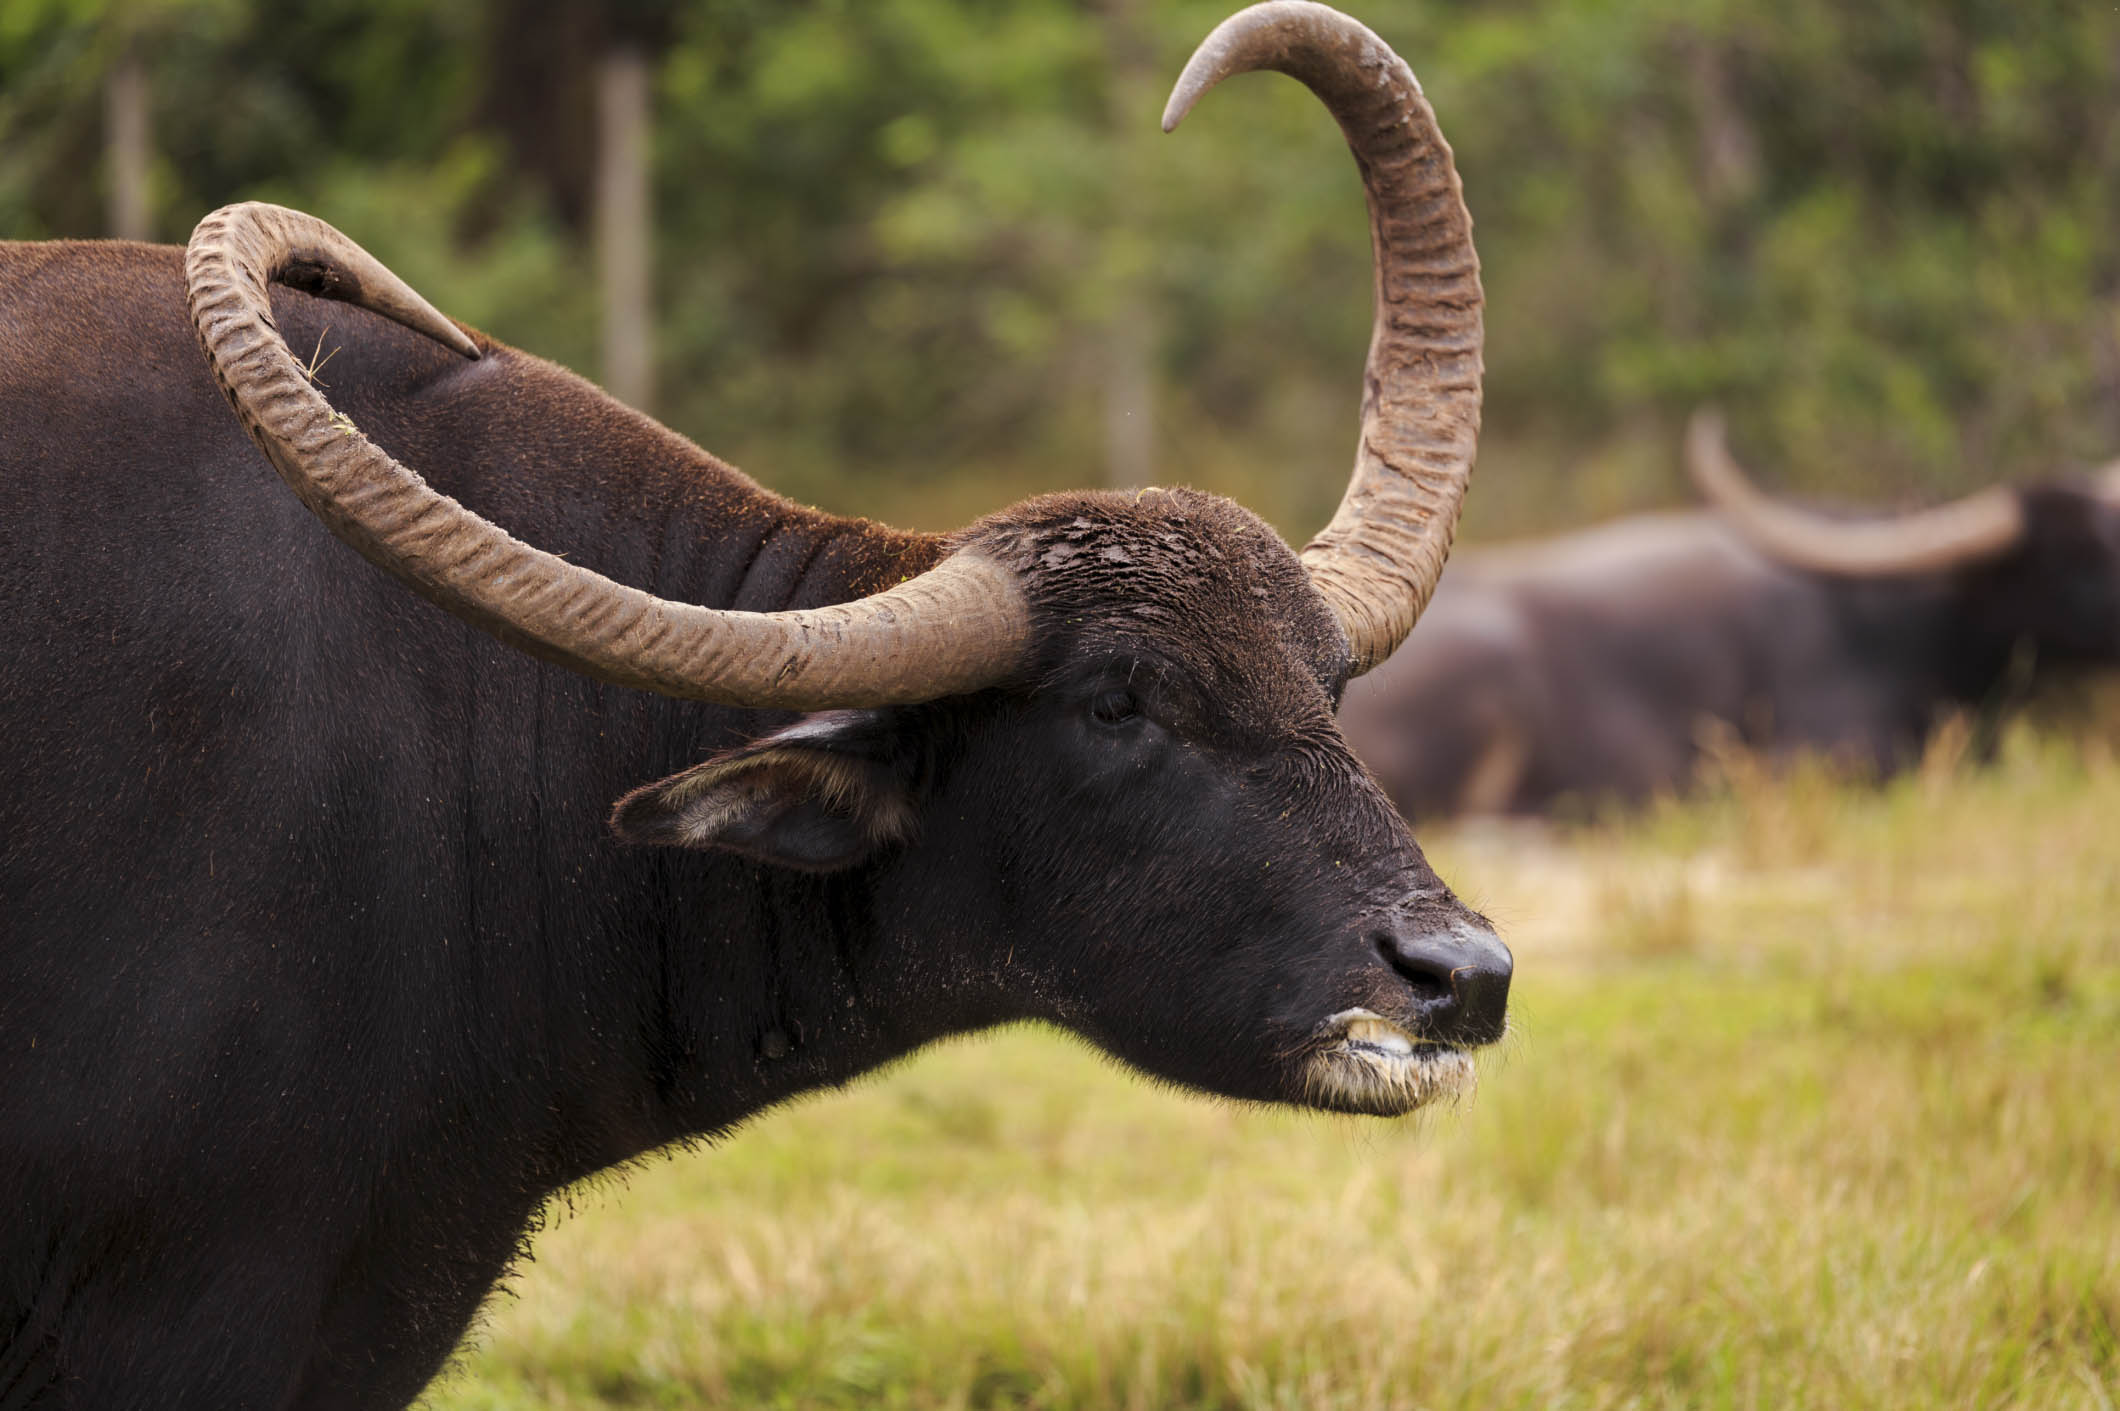 Little known ways to discourage a water buffalo and other tips from a rural Aussie locum